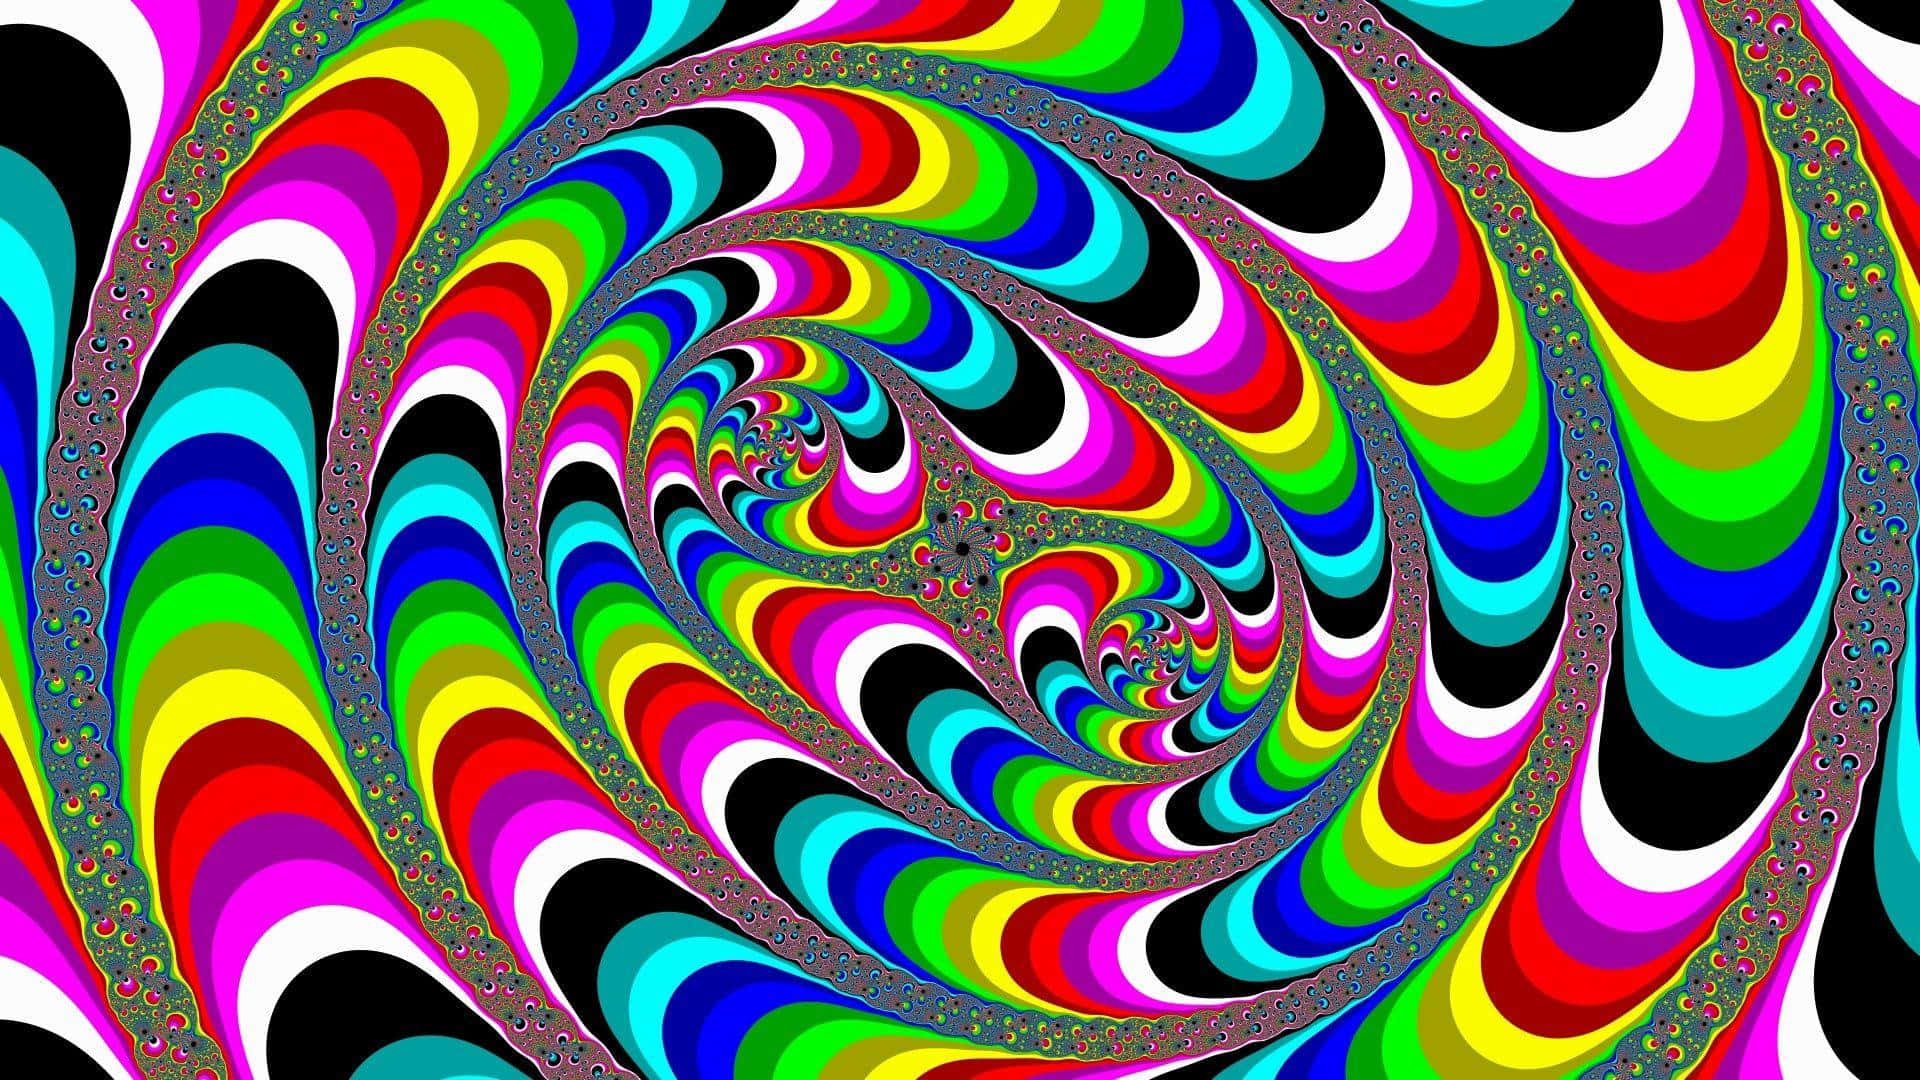 A Colorful Psychedelic Spiral Pattern Wallpaper